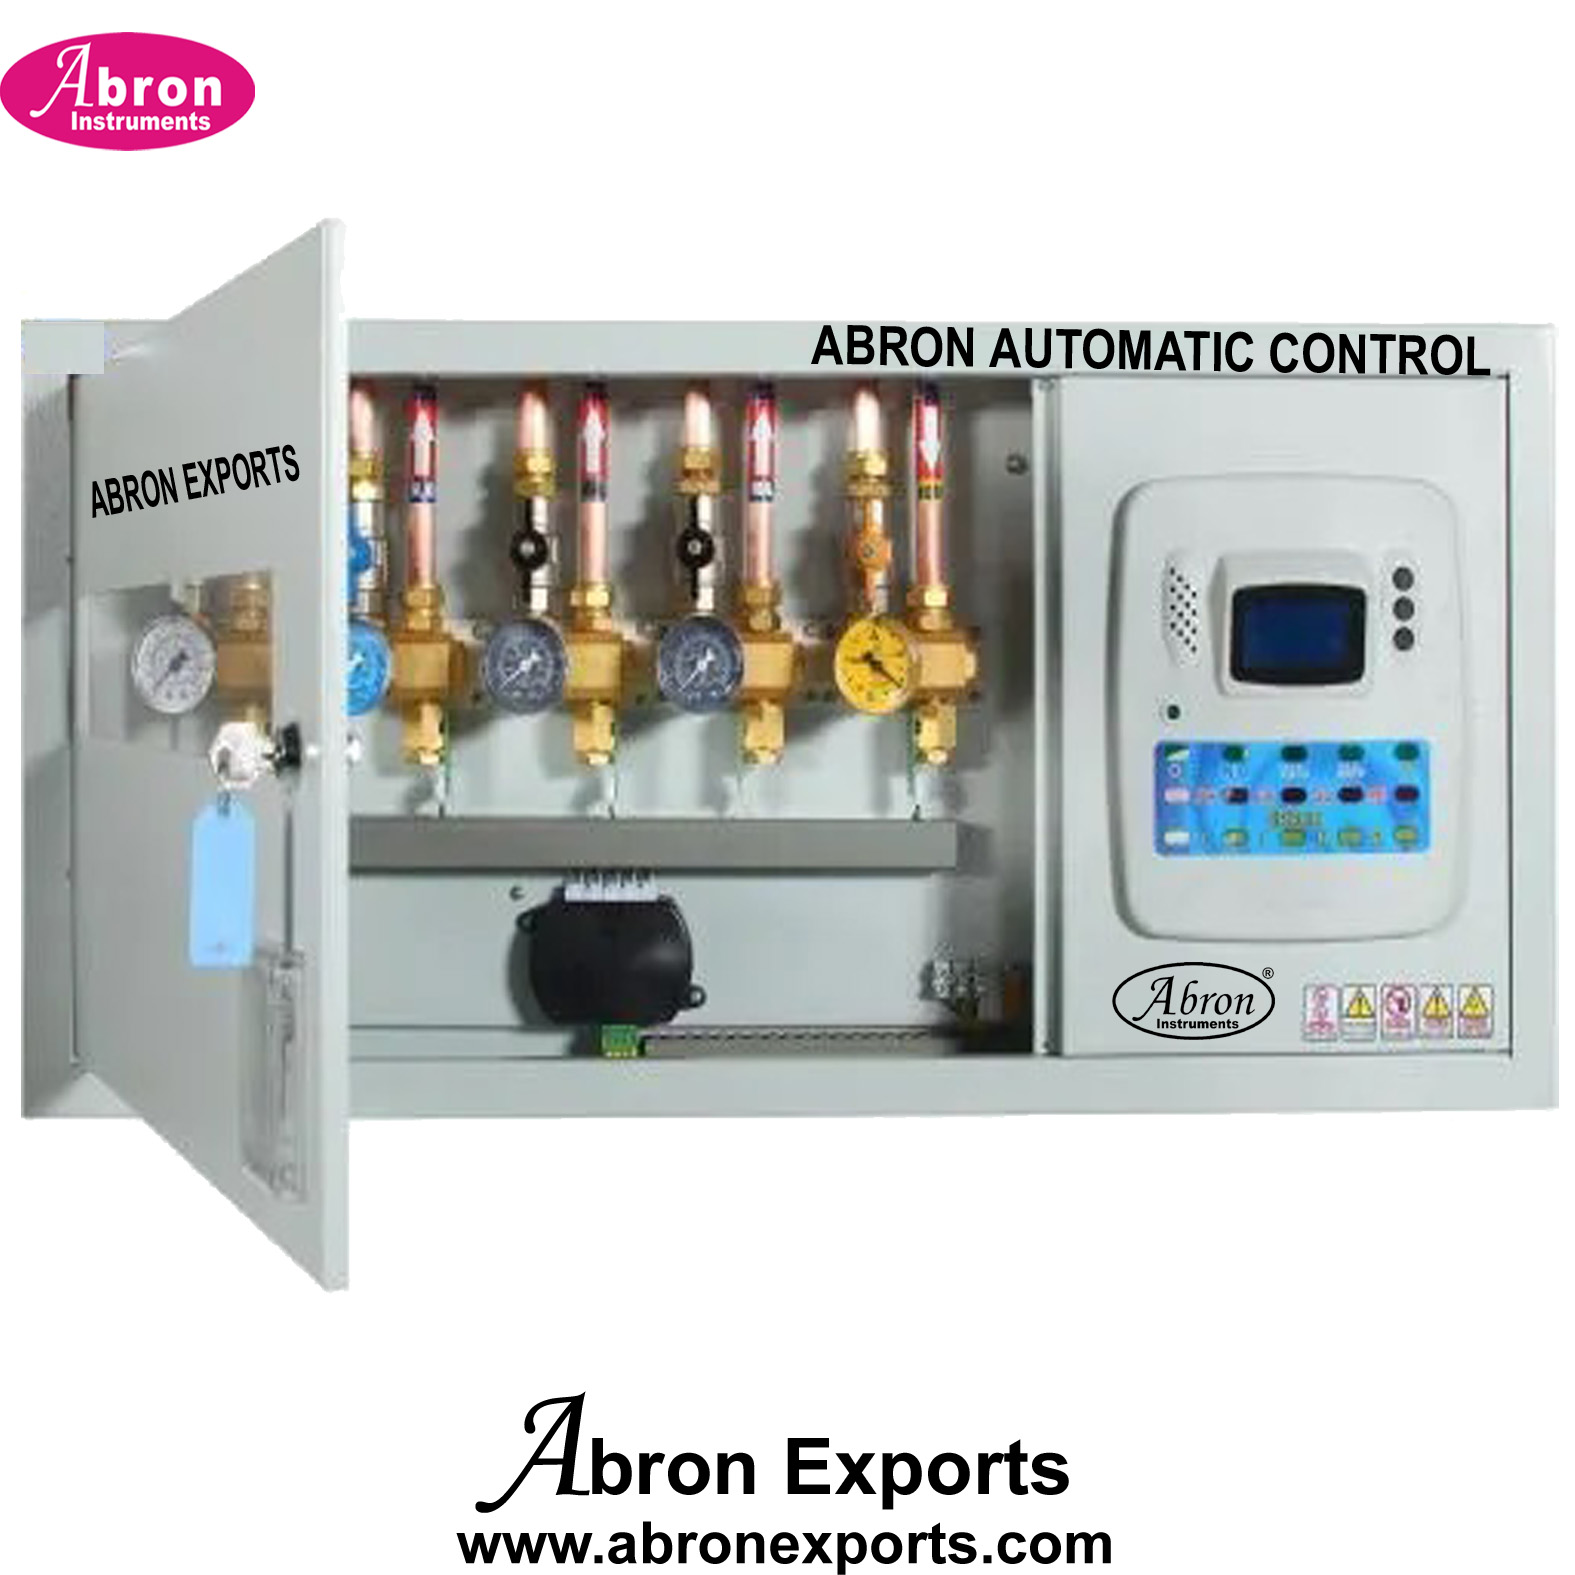 Medical Oxygen Gas Pipe line gas system with gauge controller box Abron ABM-1120PG4 